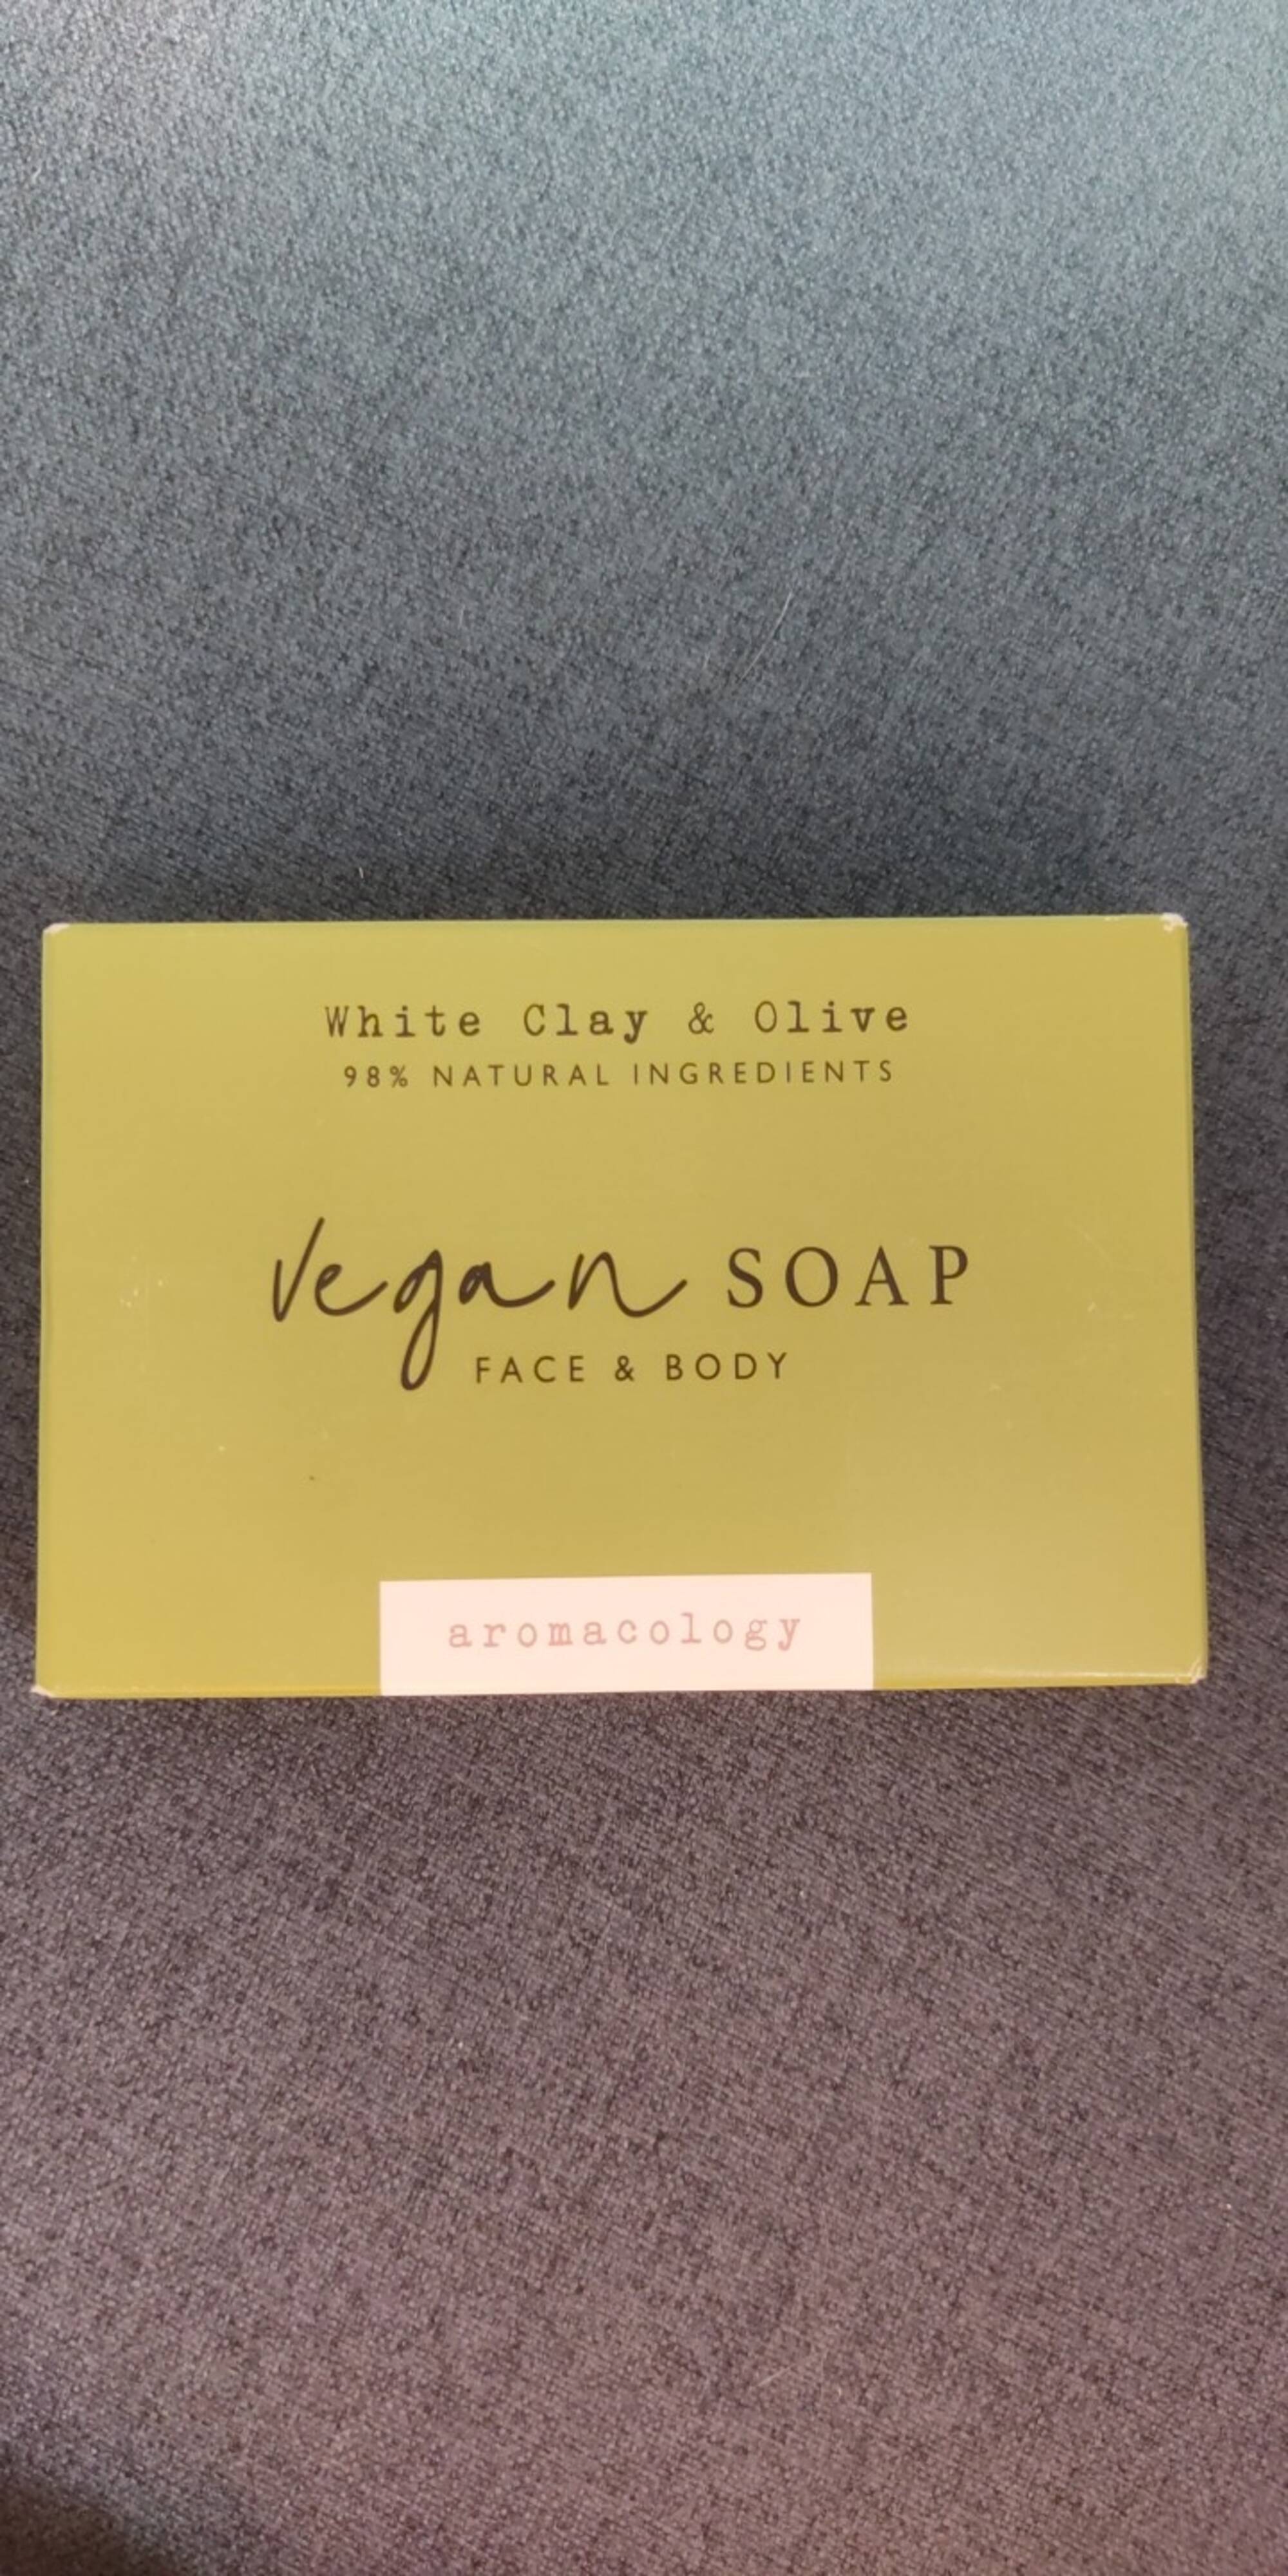 AROMACOLOGY - White clay & olive - Vegan soap